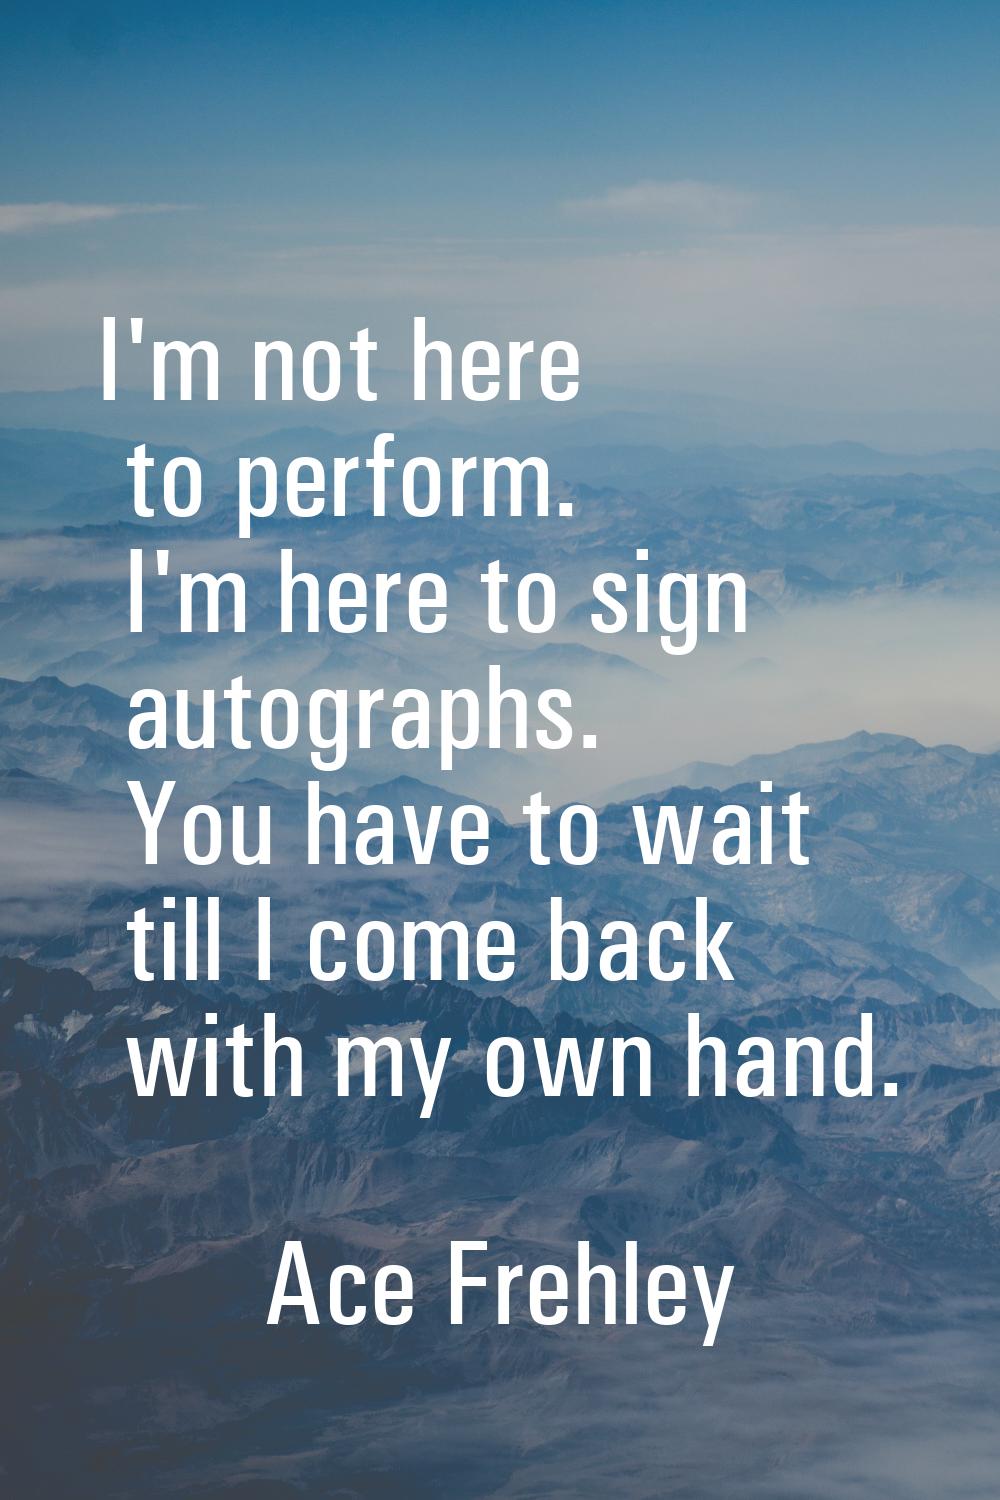 I'm not here to perform. I'm here to sign autographs. You have to wait till I come back with my own